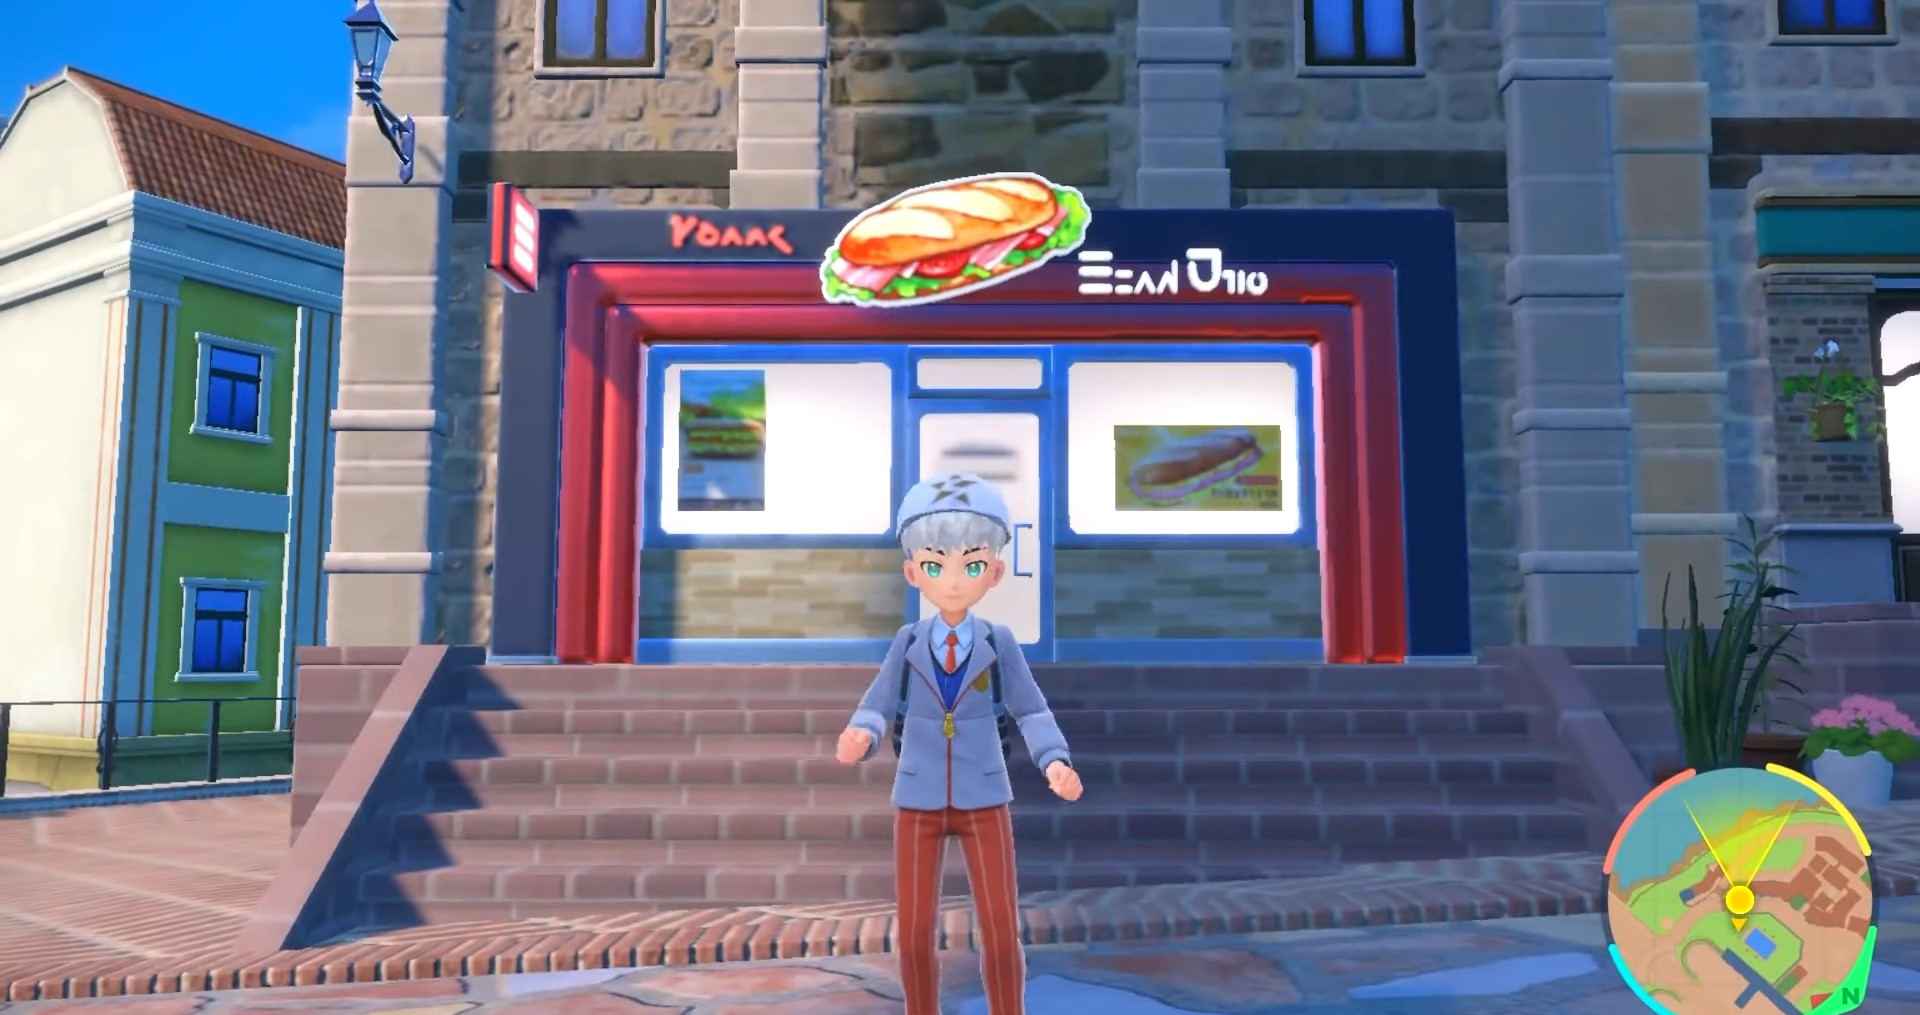  how to get all sandwich recipes pokemon scarlet- Sandwich Shop in Pokemon Scarlet and Violet